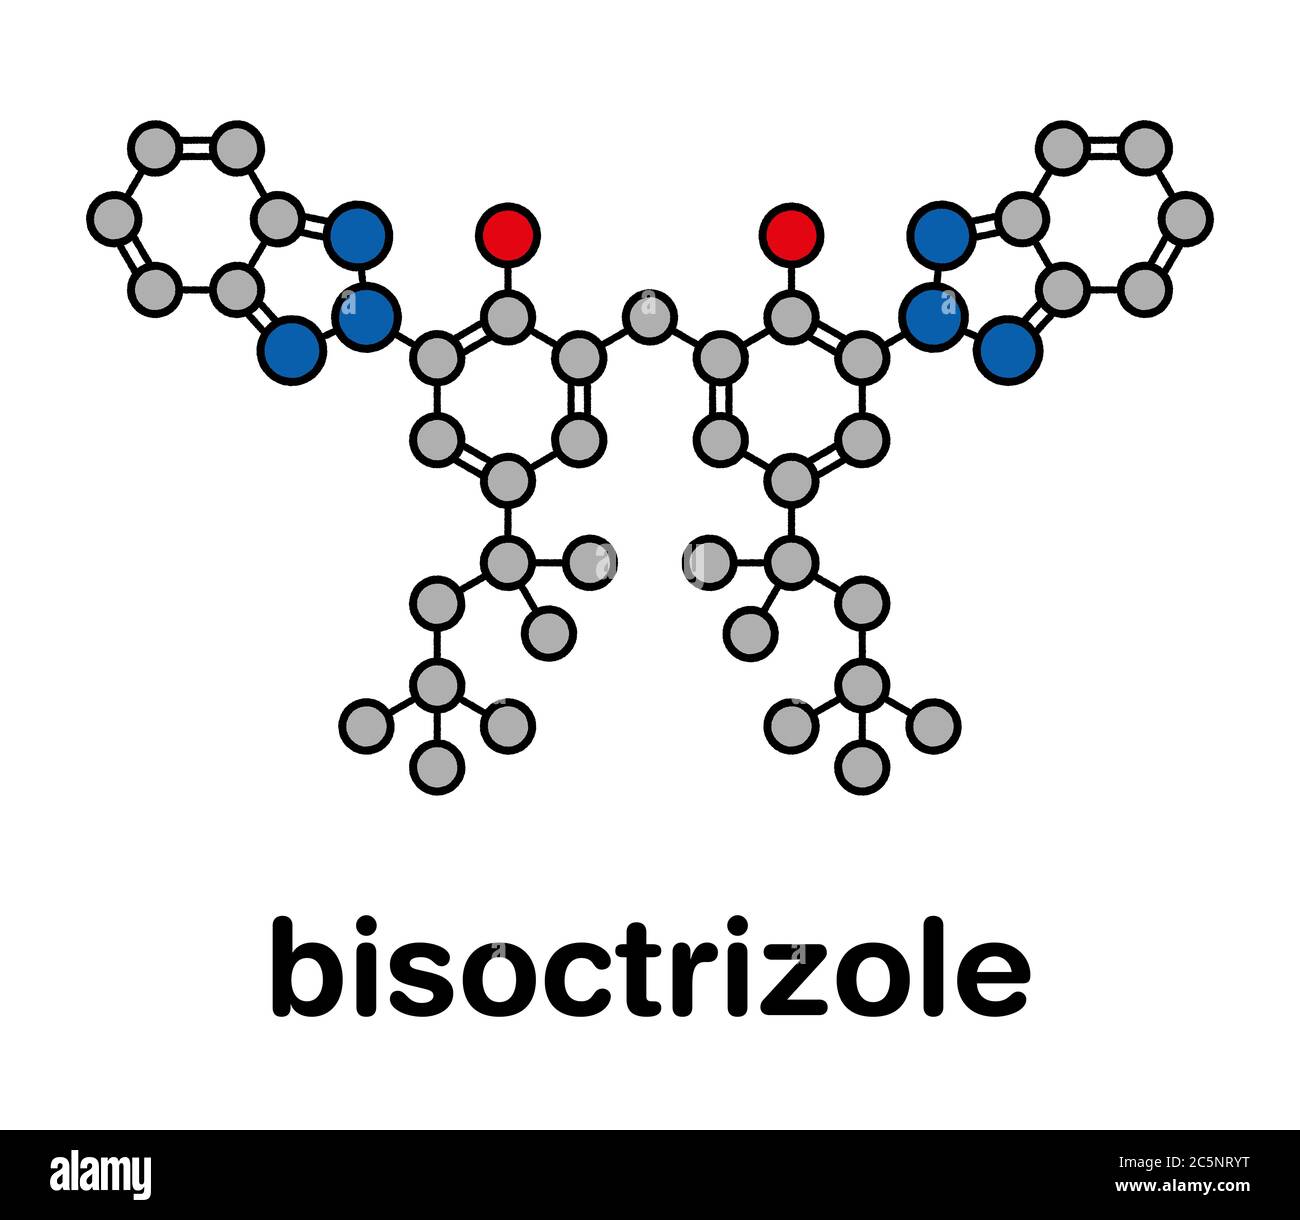 Bisoctrizole sunscreen molecule. Stylized skeletal formula (chemical structure): Atoms are shown as color-coded circles: hydrogen (hidden), carbon (grey), oxygen (red), nitrogen (blue). Stock Photo